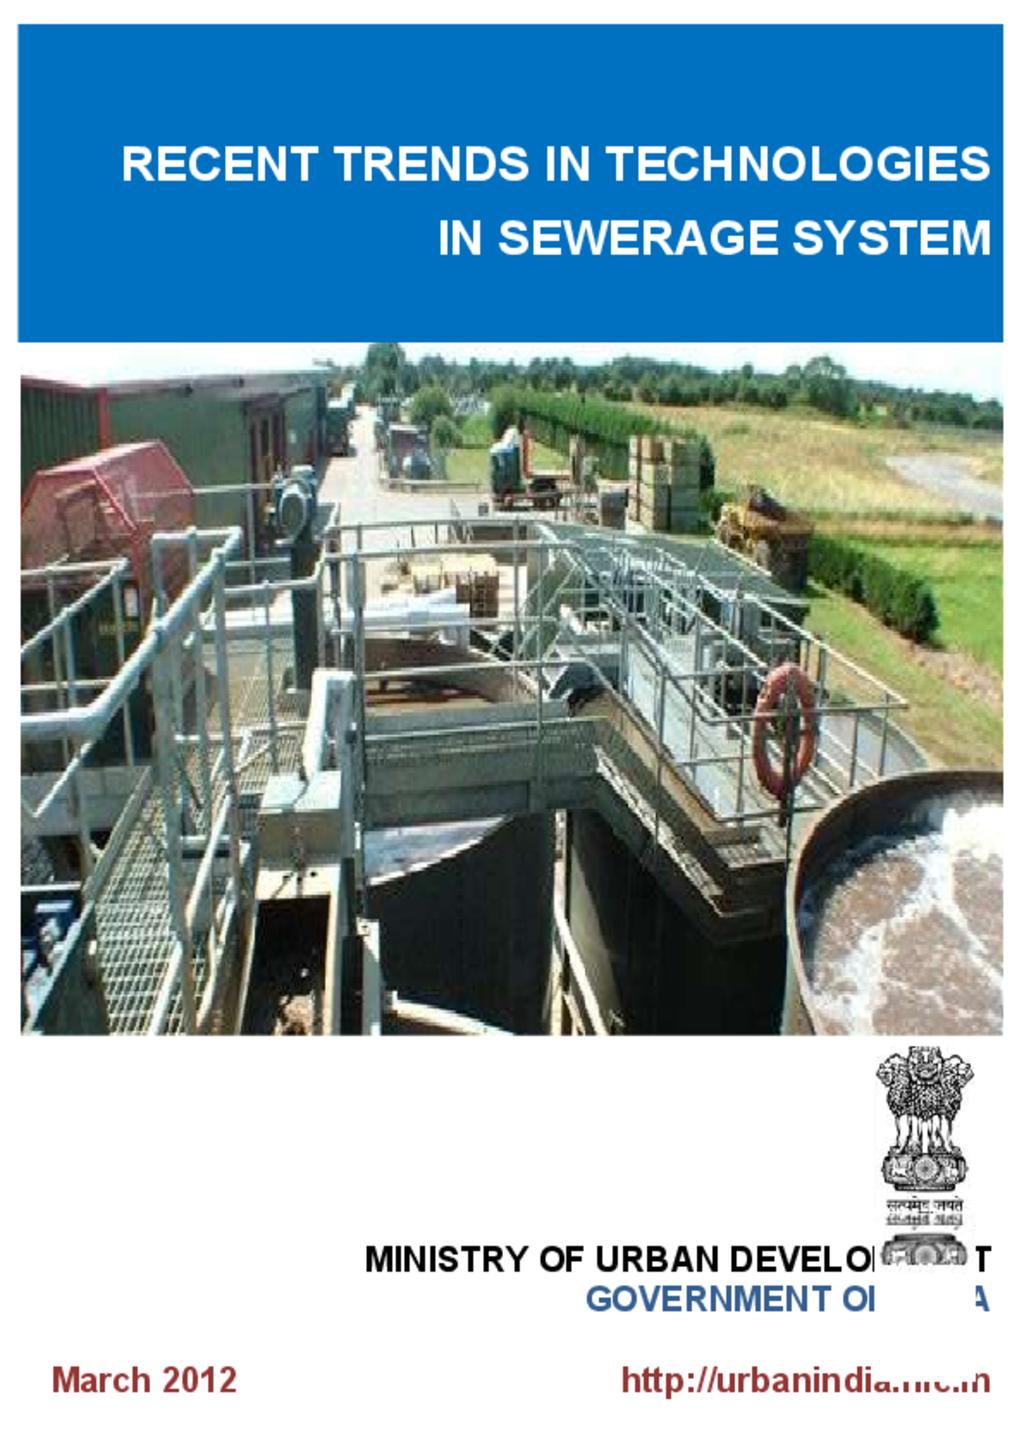 Recent Trends in Technologies in Sewerage System